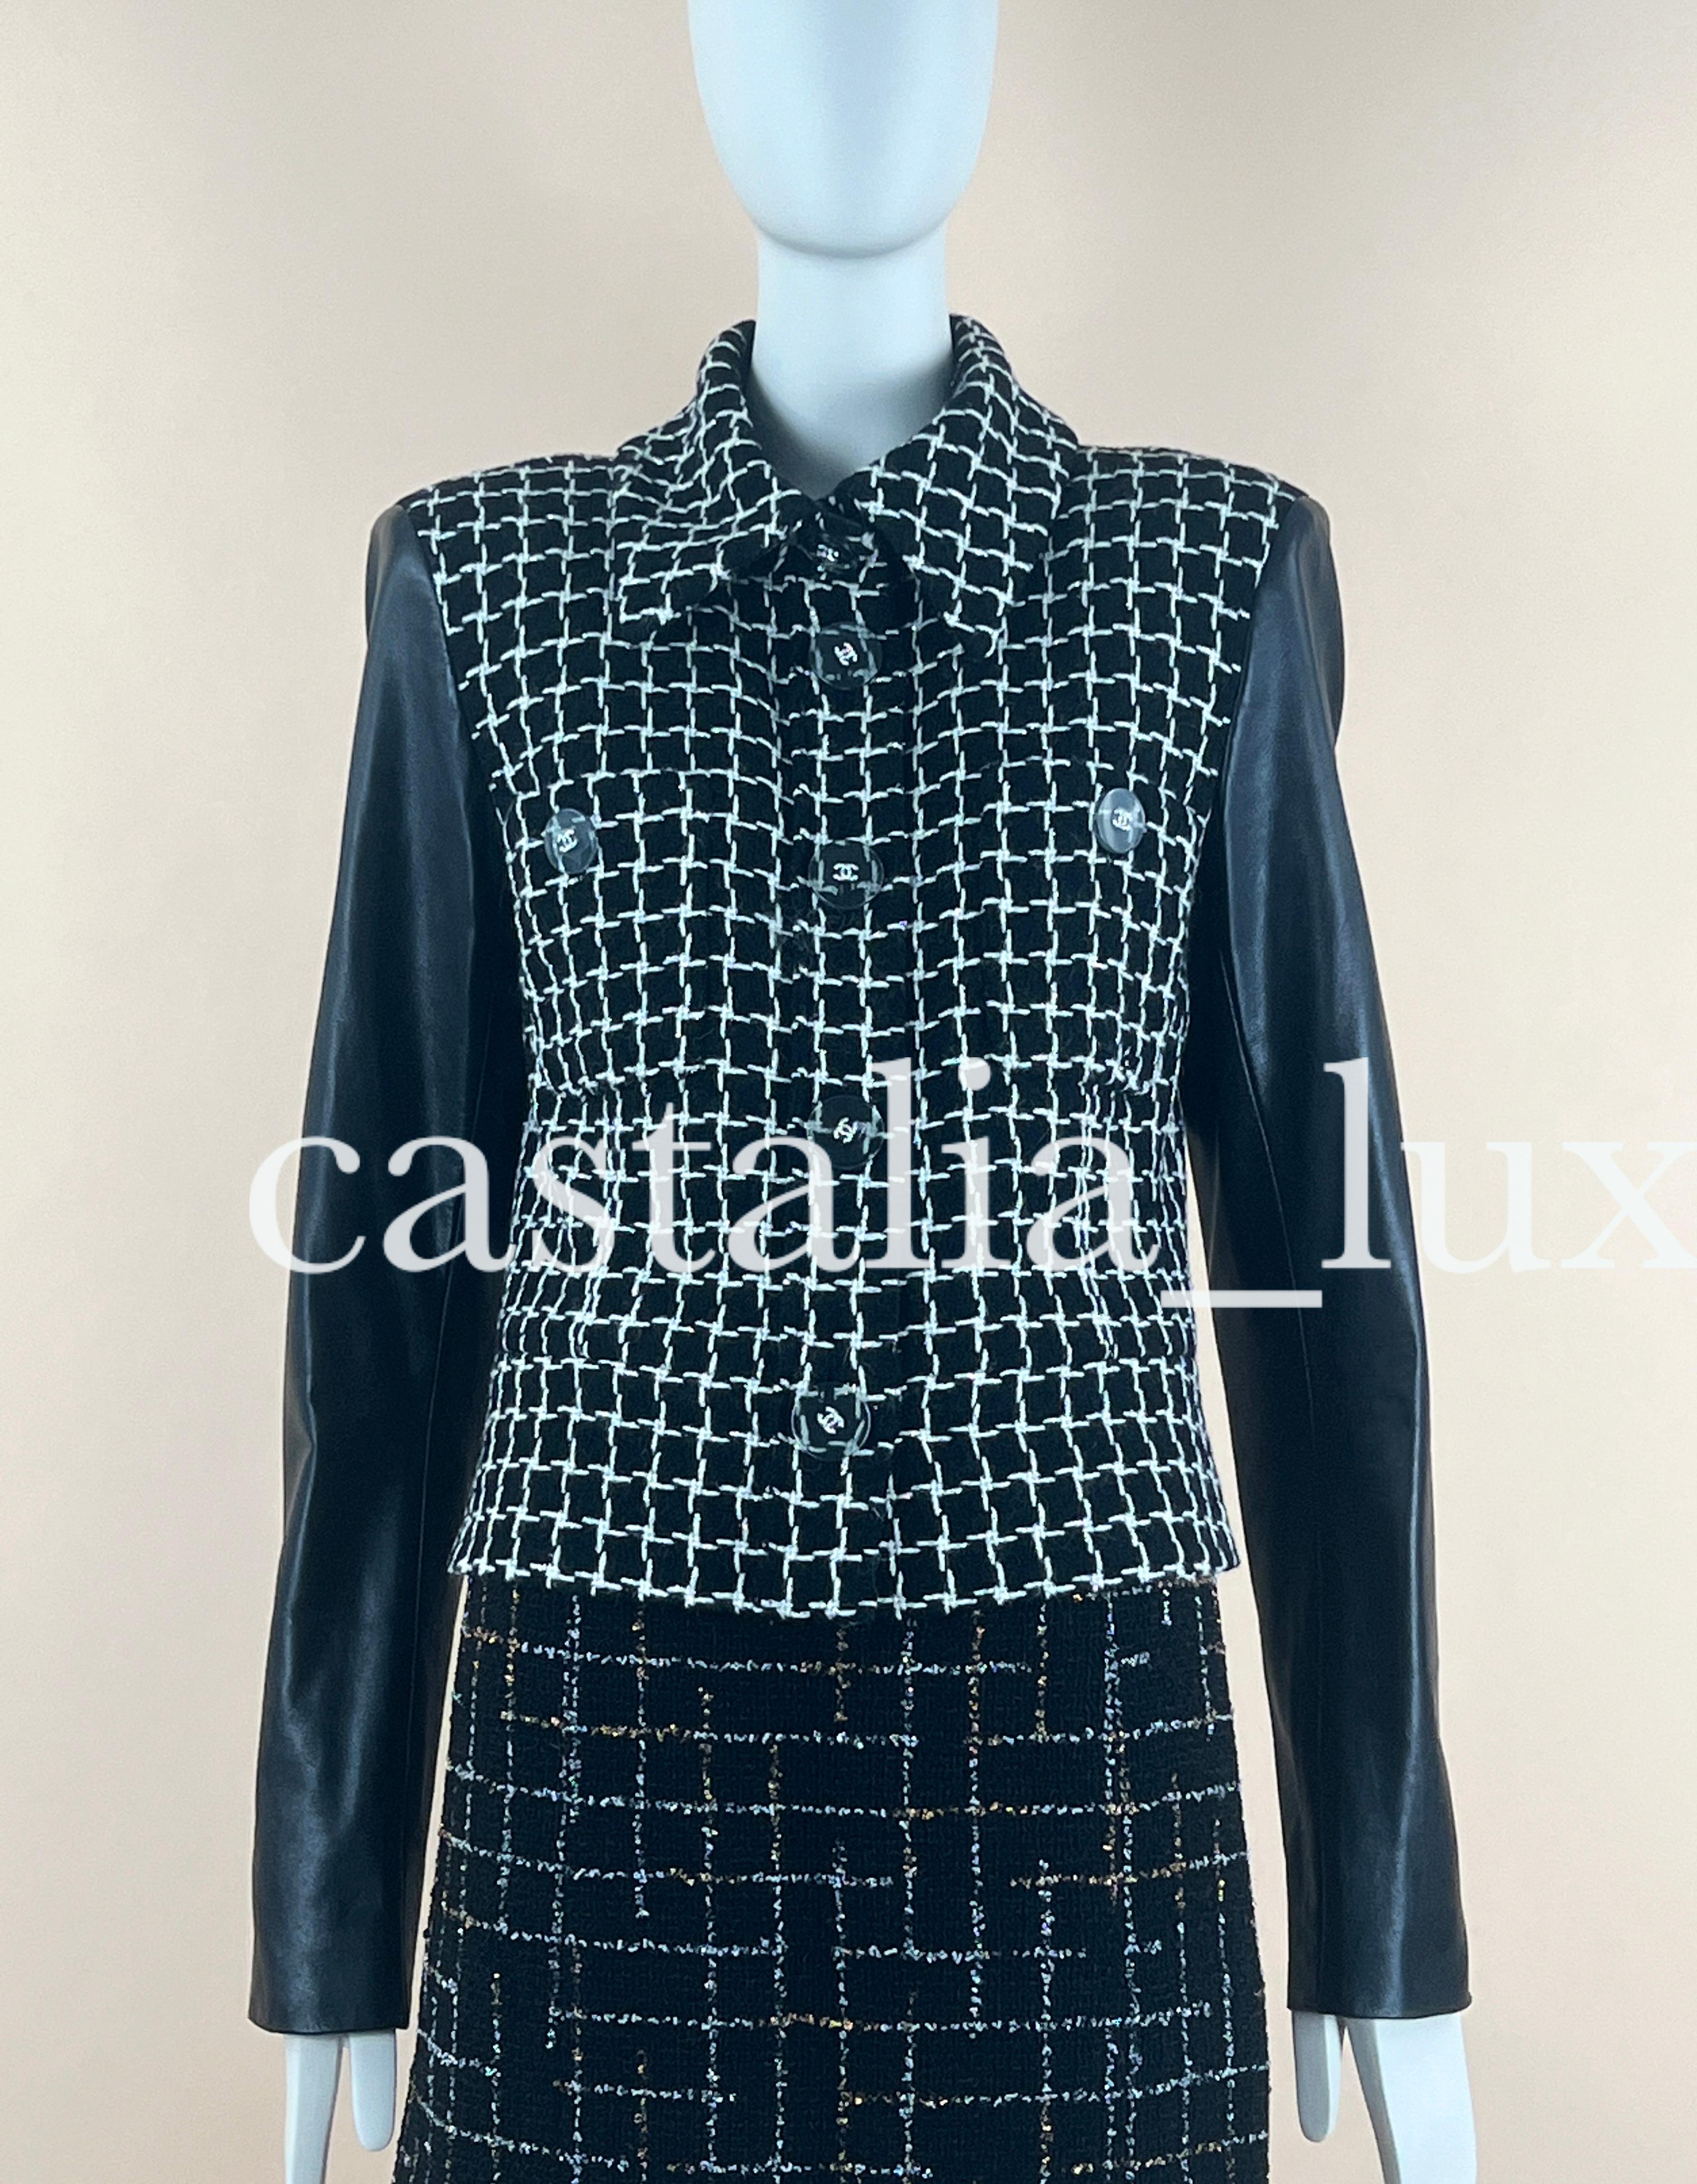 Chanel New Paris / Cosmopolite Runway Jacket In New Condition For Sale In Dubai, AE